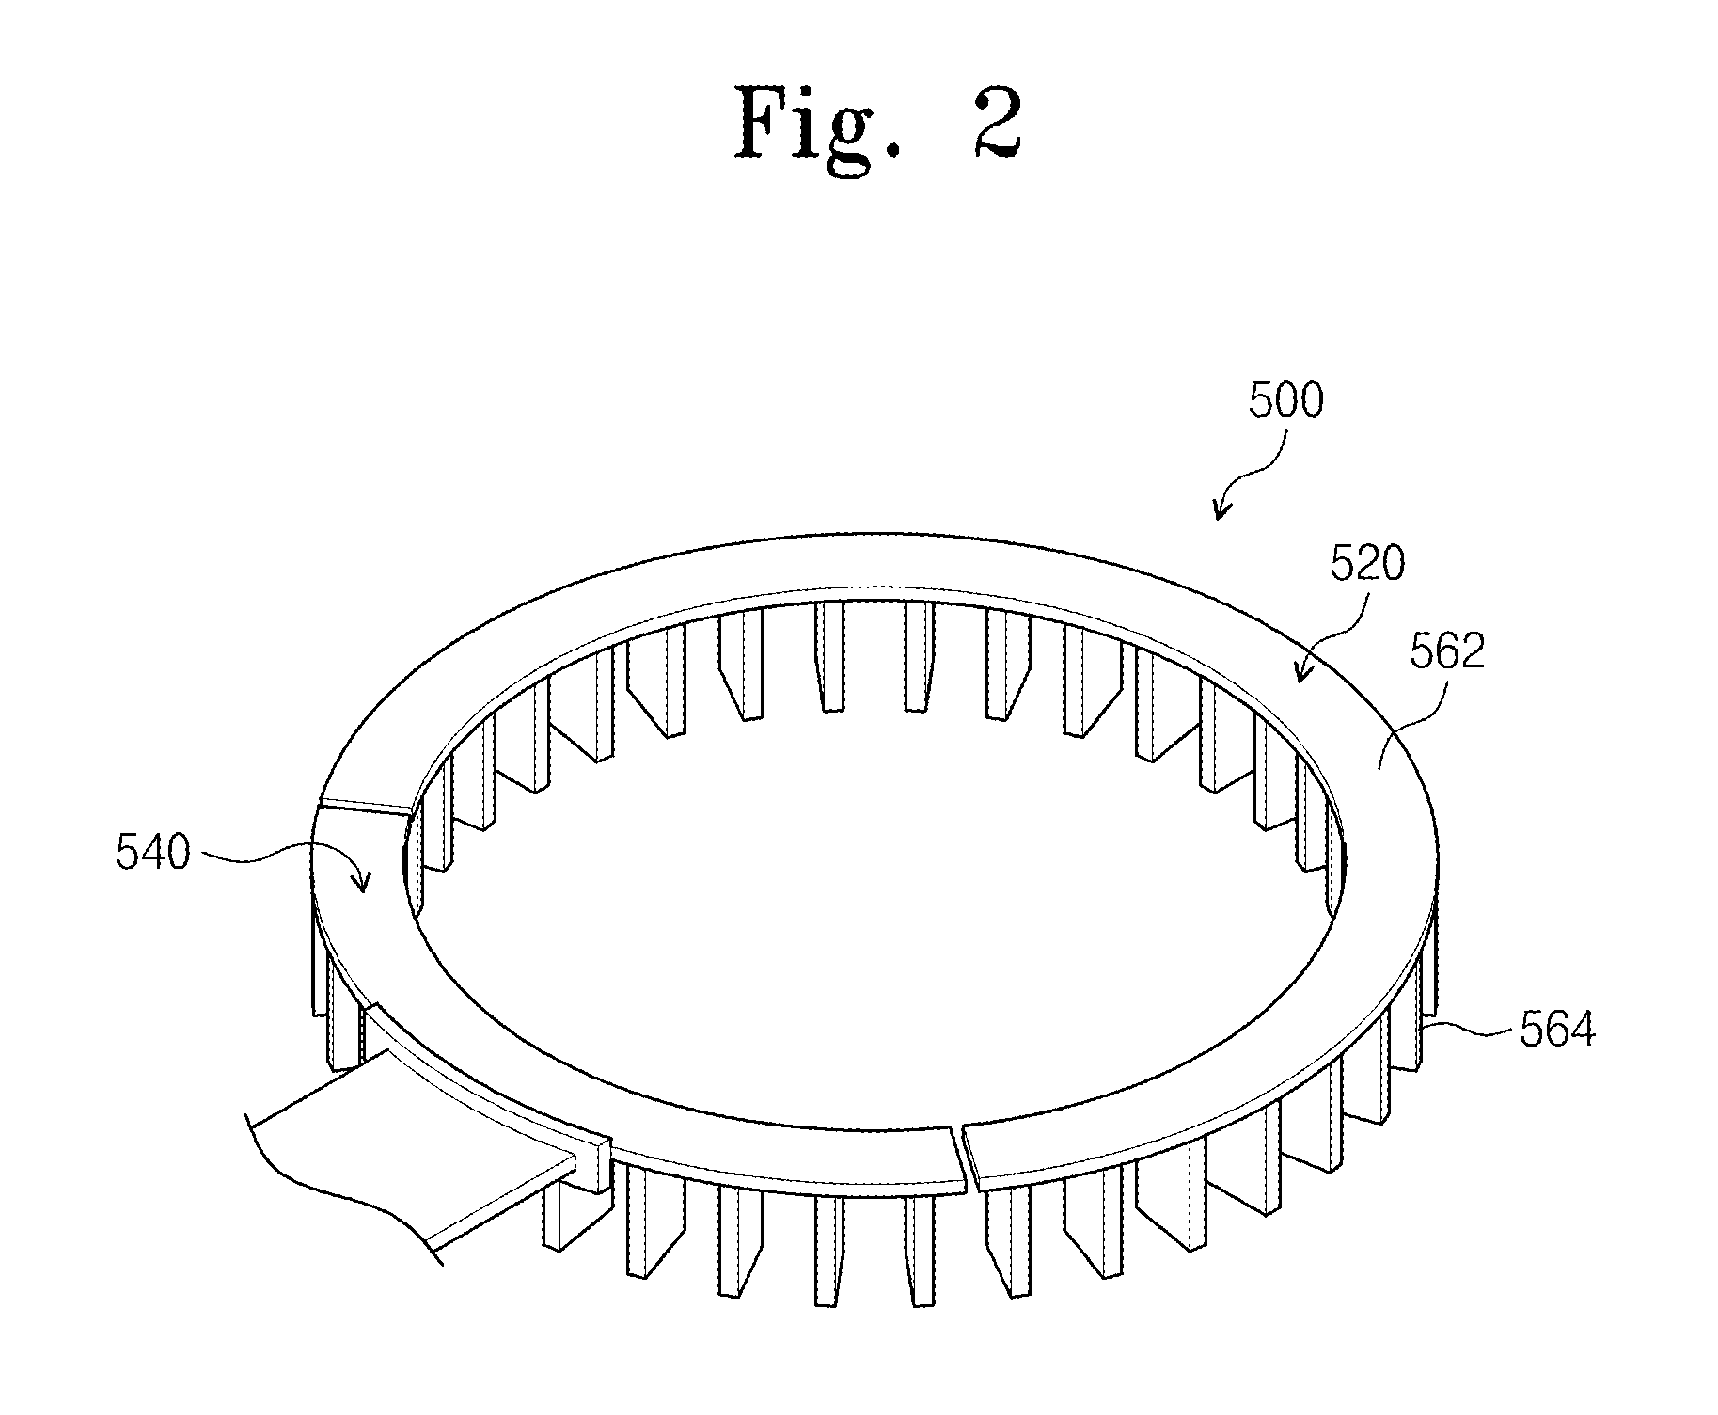 Plasma boundary limiter unit and apparatus for treating substrate